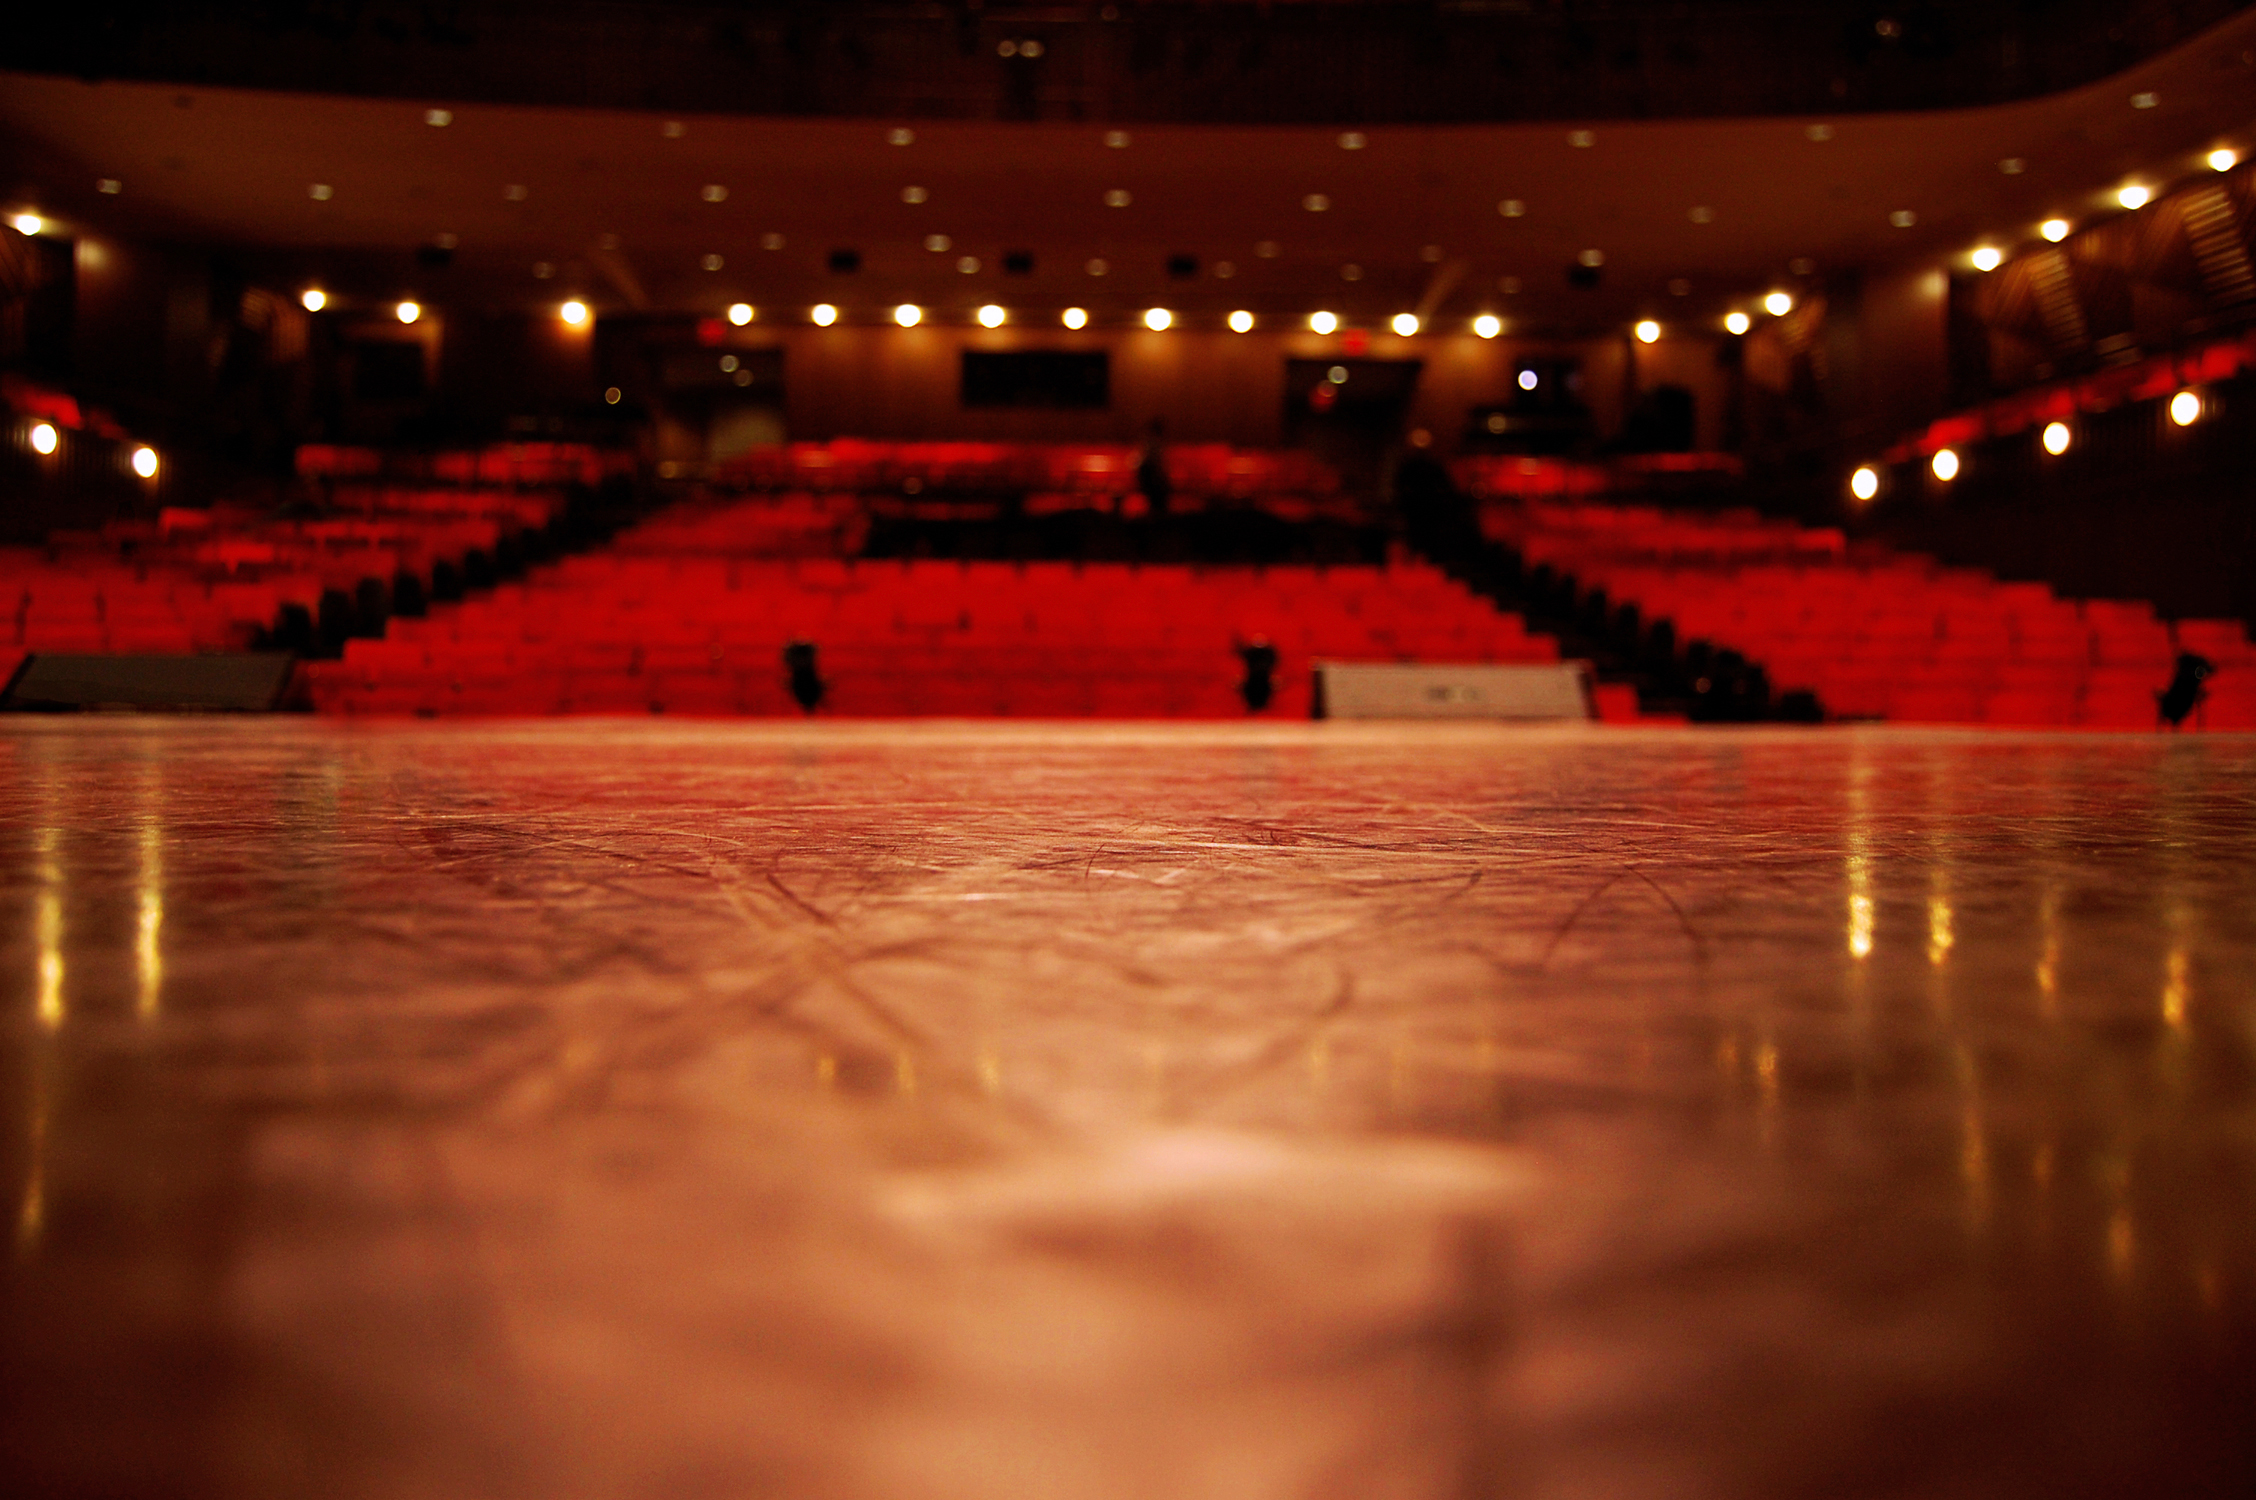 a stage view of an empty theater